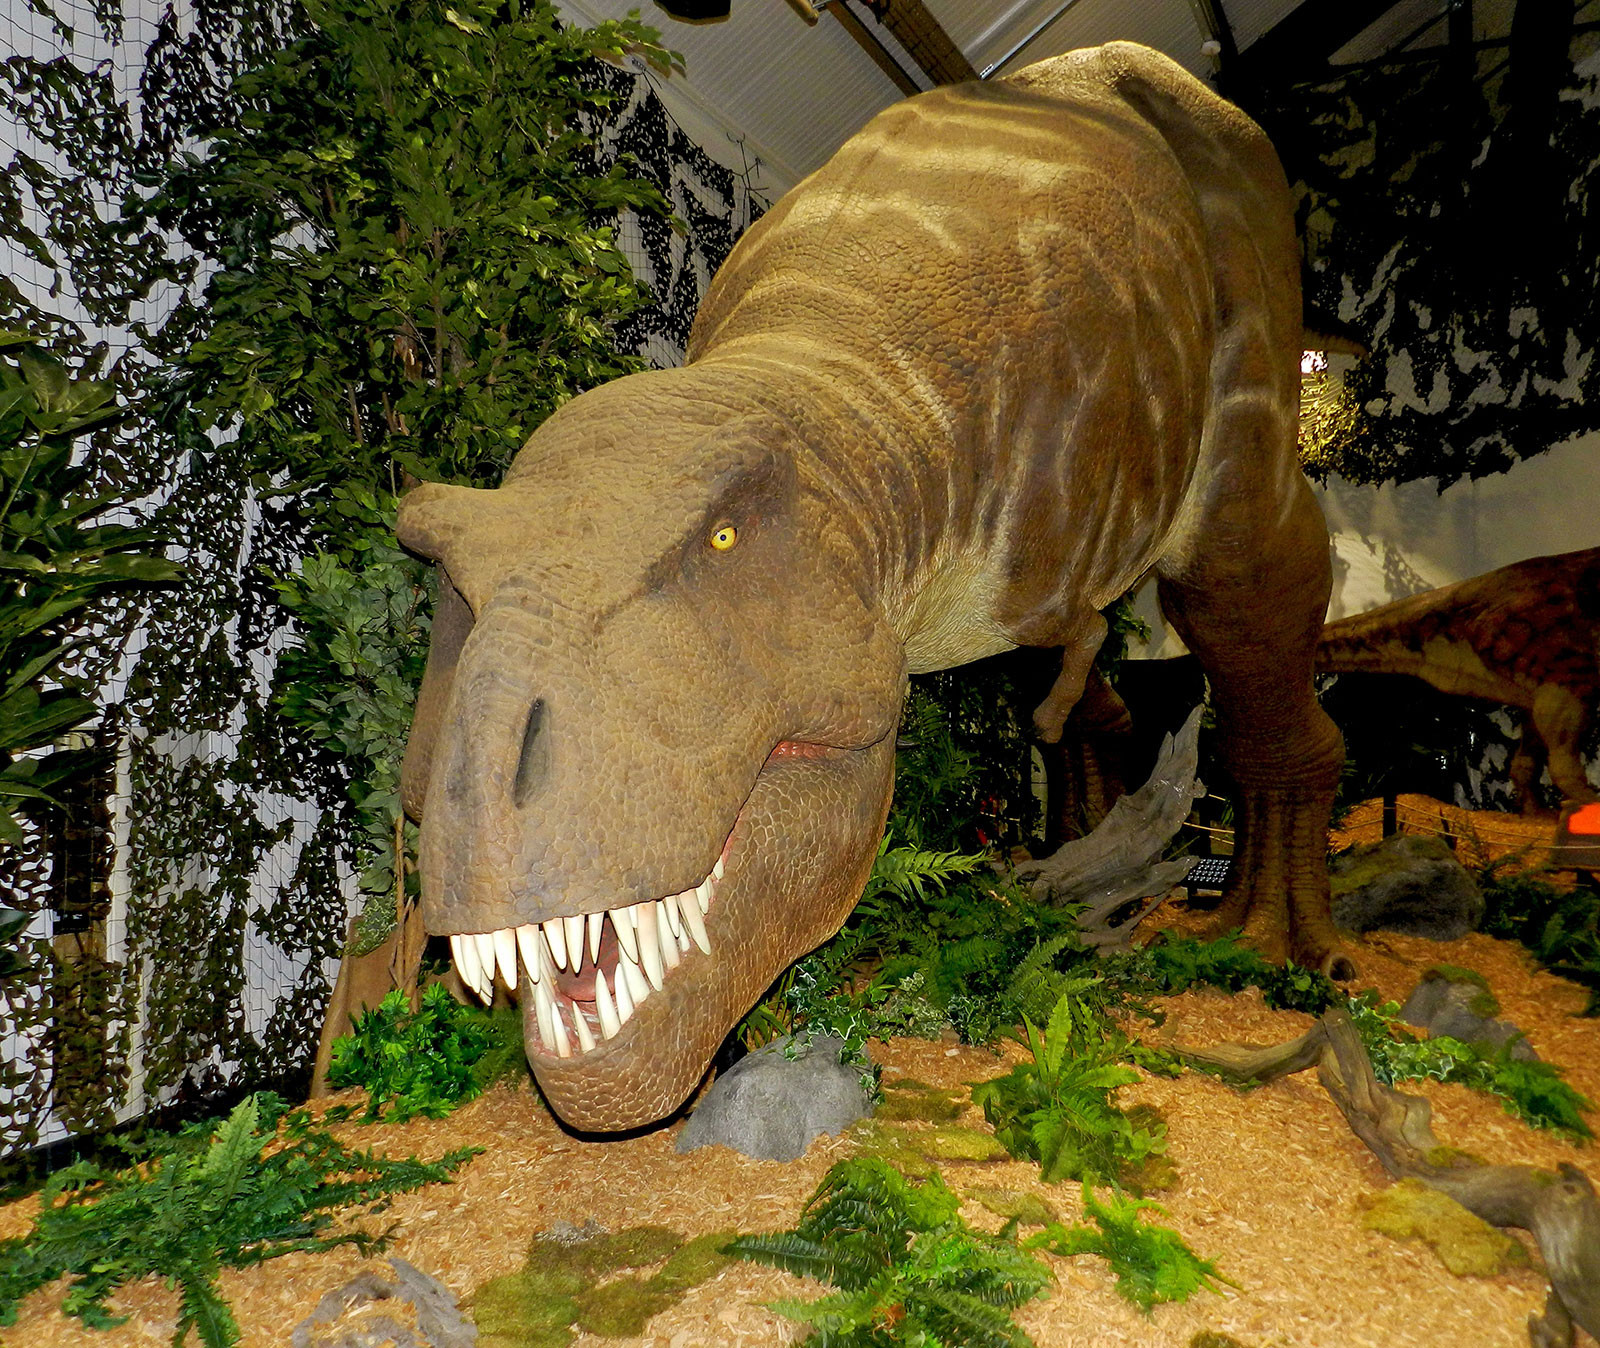 Animatronic dinosaurs brought to life with compressed air